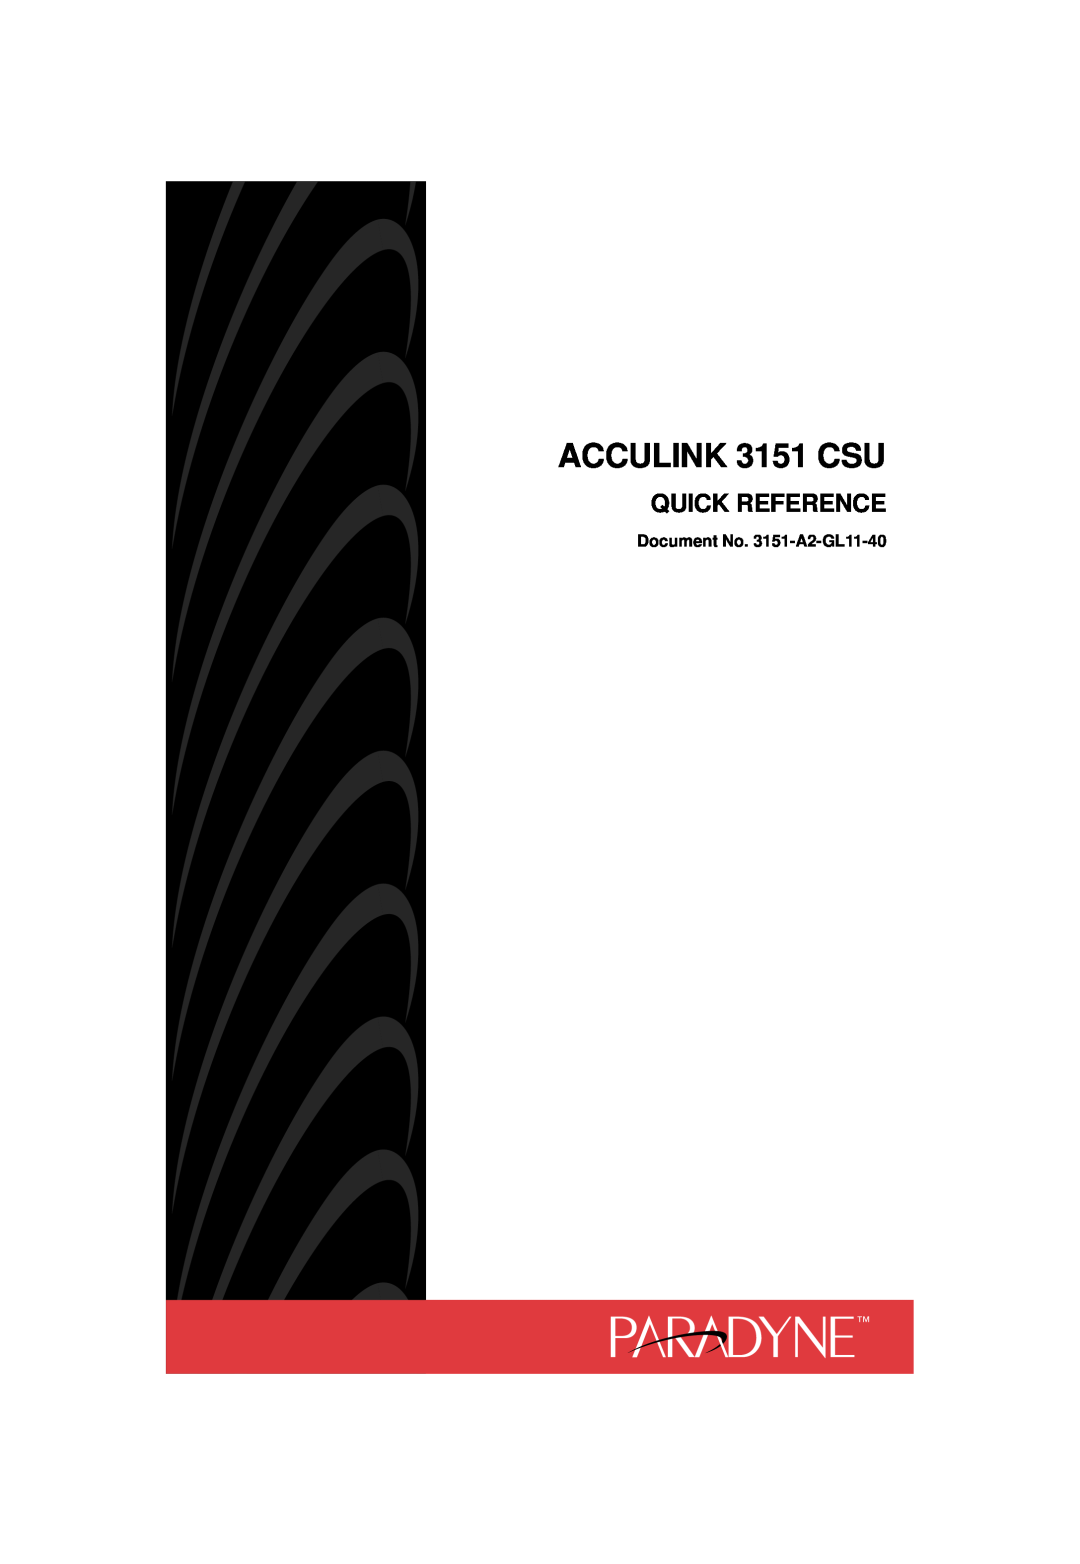 Paradyne manual ACCULINK 3151 CSU, Quick Reference, Document No. 3151-A2-GL11-40 